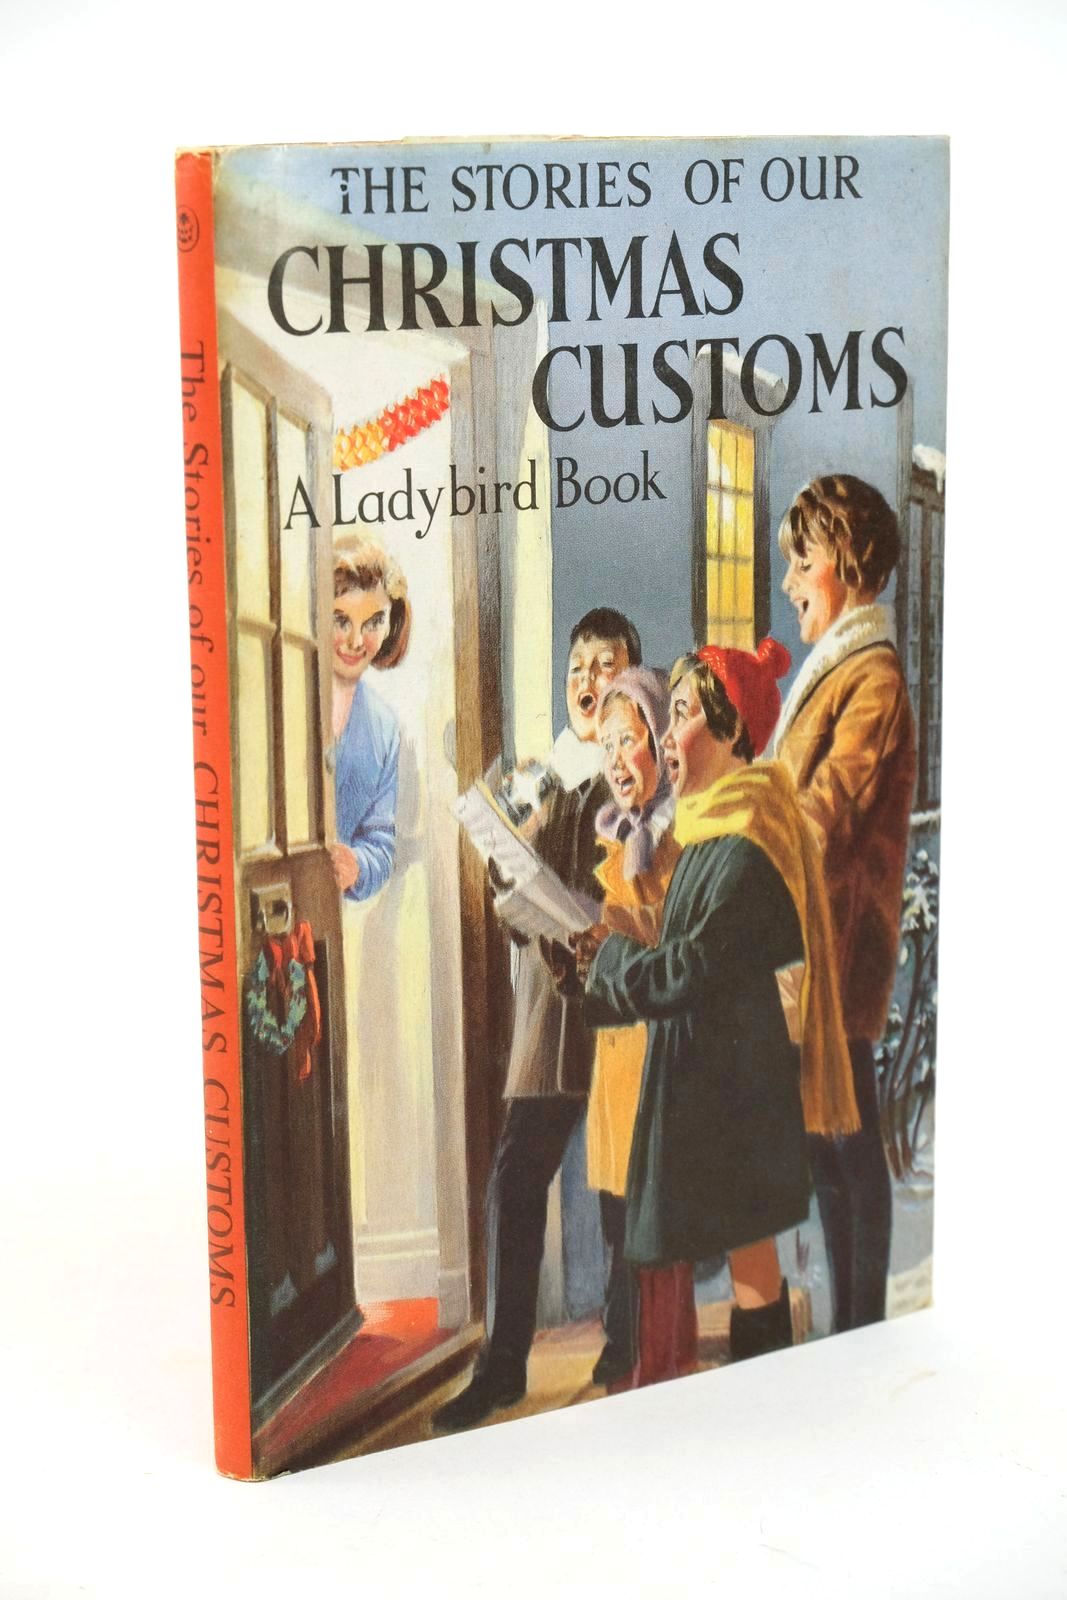 Photo of THE STORIES OF OUR CHRISTMAS CUSTOMS written by Pearson, N.F. illustrated by Hampson, Frank published by Wills &amp; Hepworth Ltd. (STOCK CODE: 1323154)  for sale by Stella & Rose's Books